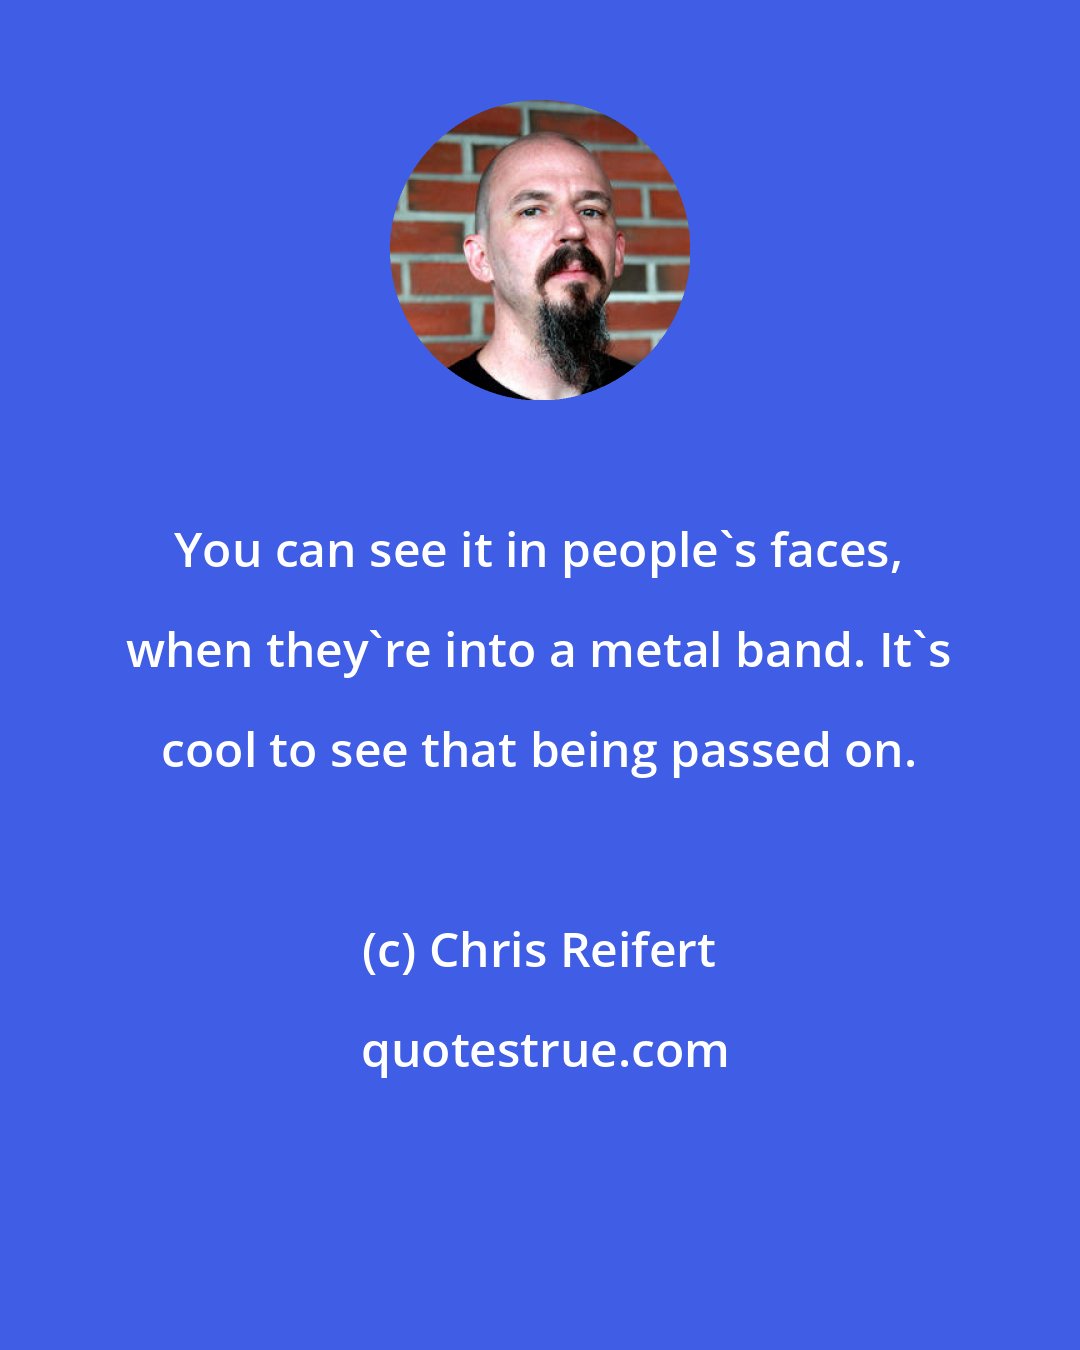 Chris Reifert: You can see it in people's faces, when they're into a metal band. It's cool to see that being passed on.